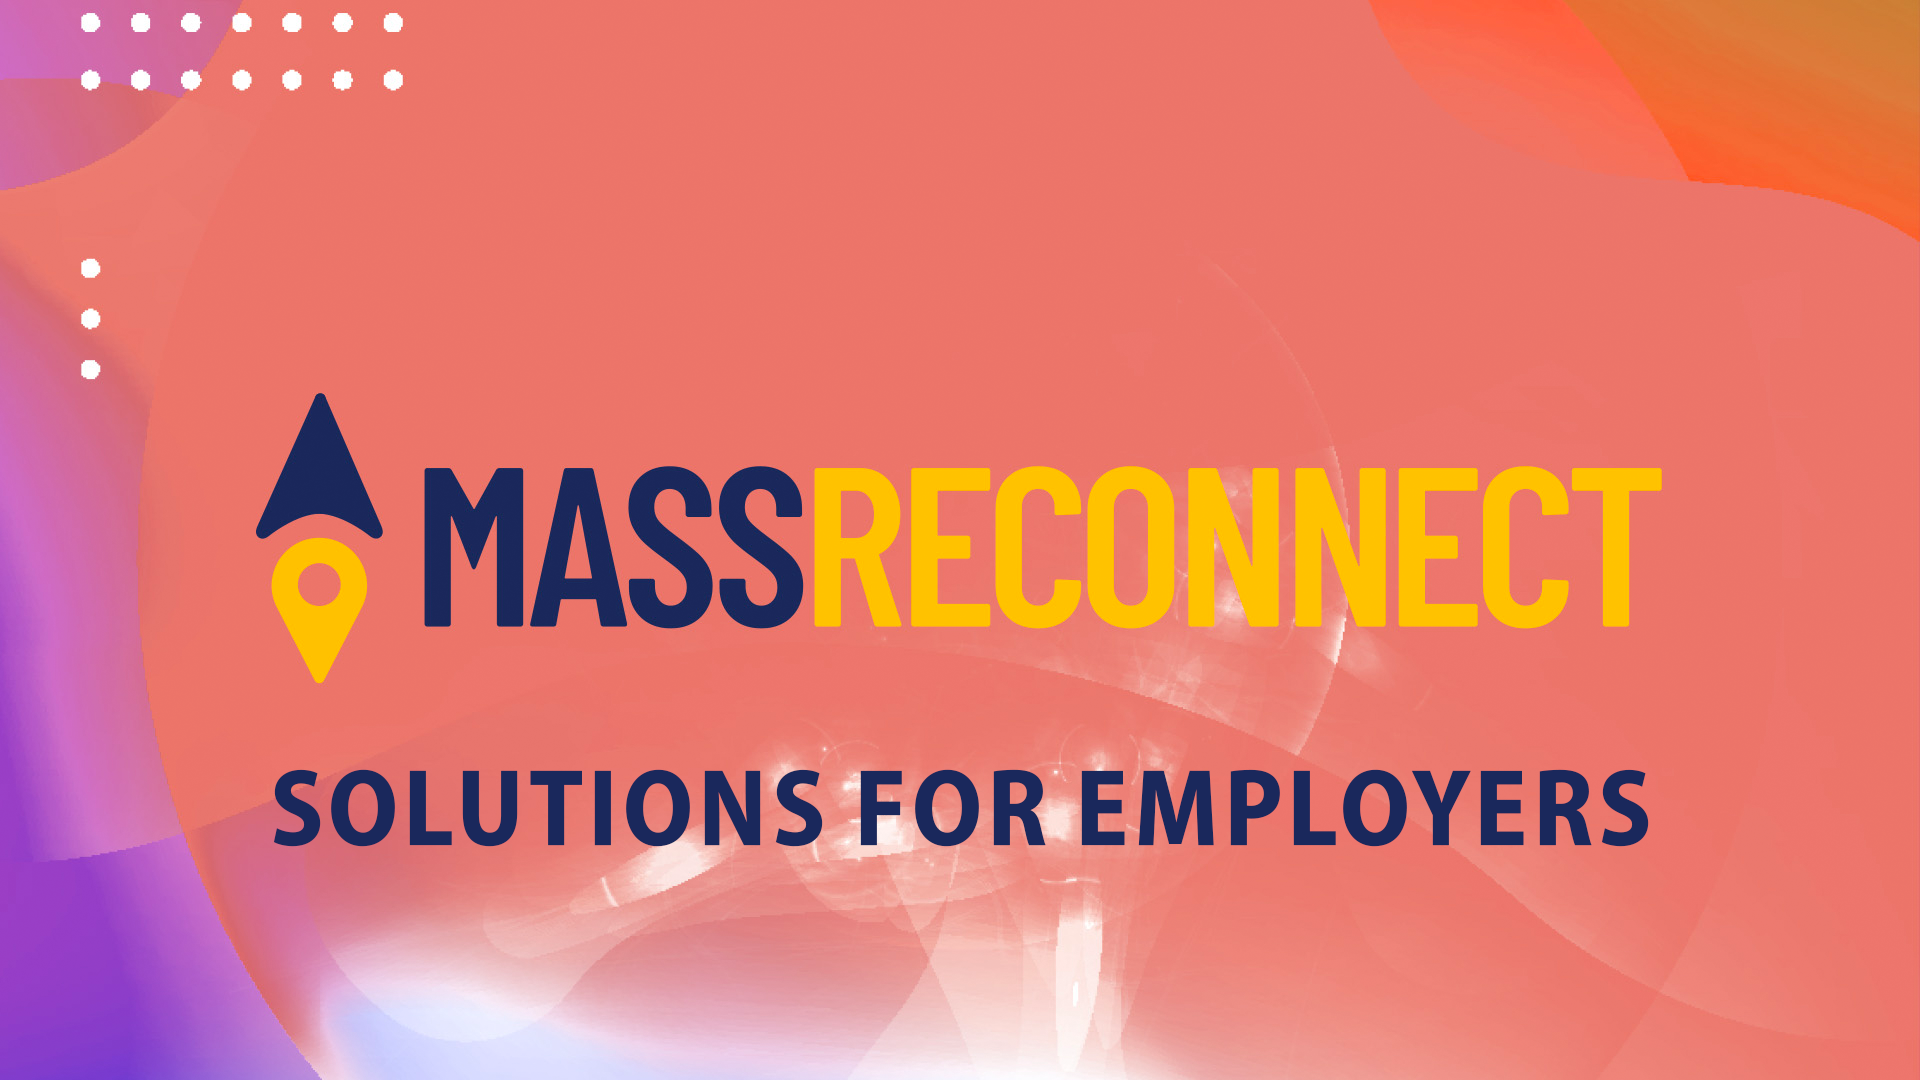 MassReconnect Solutions for Employers